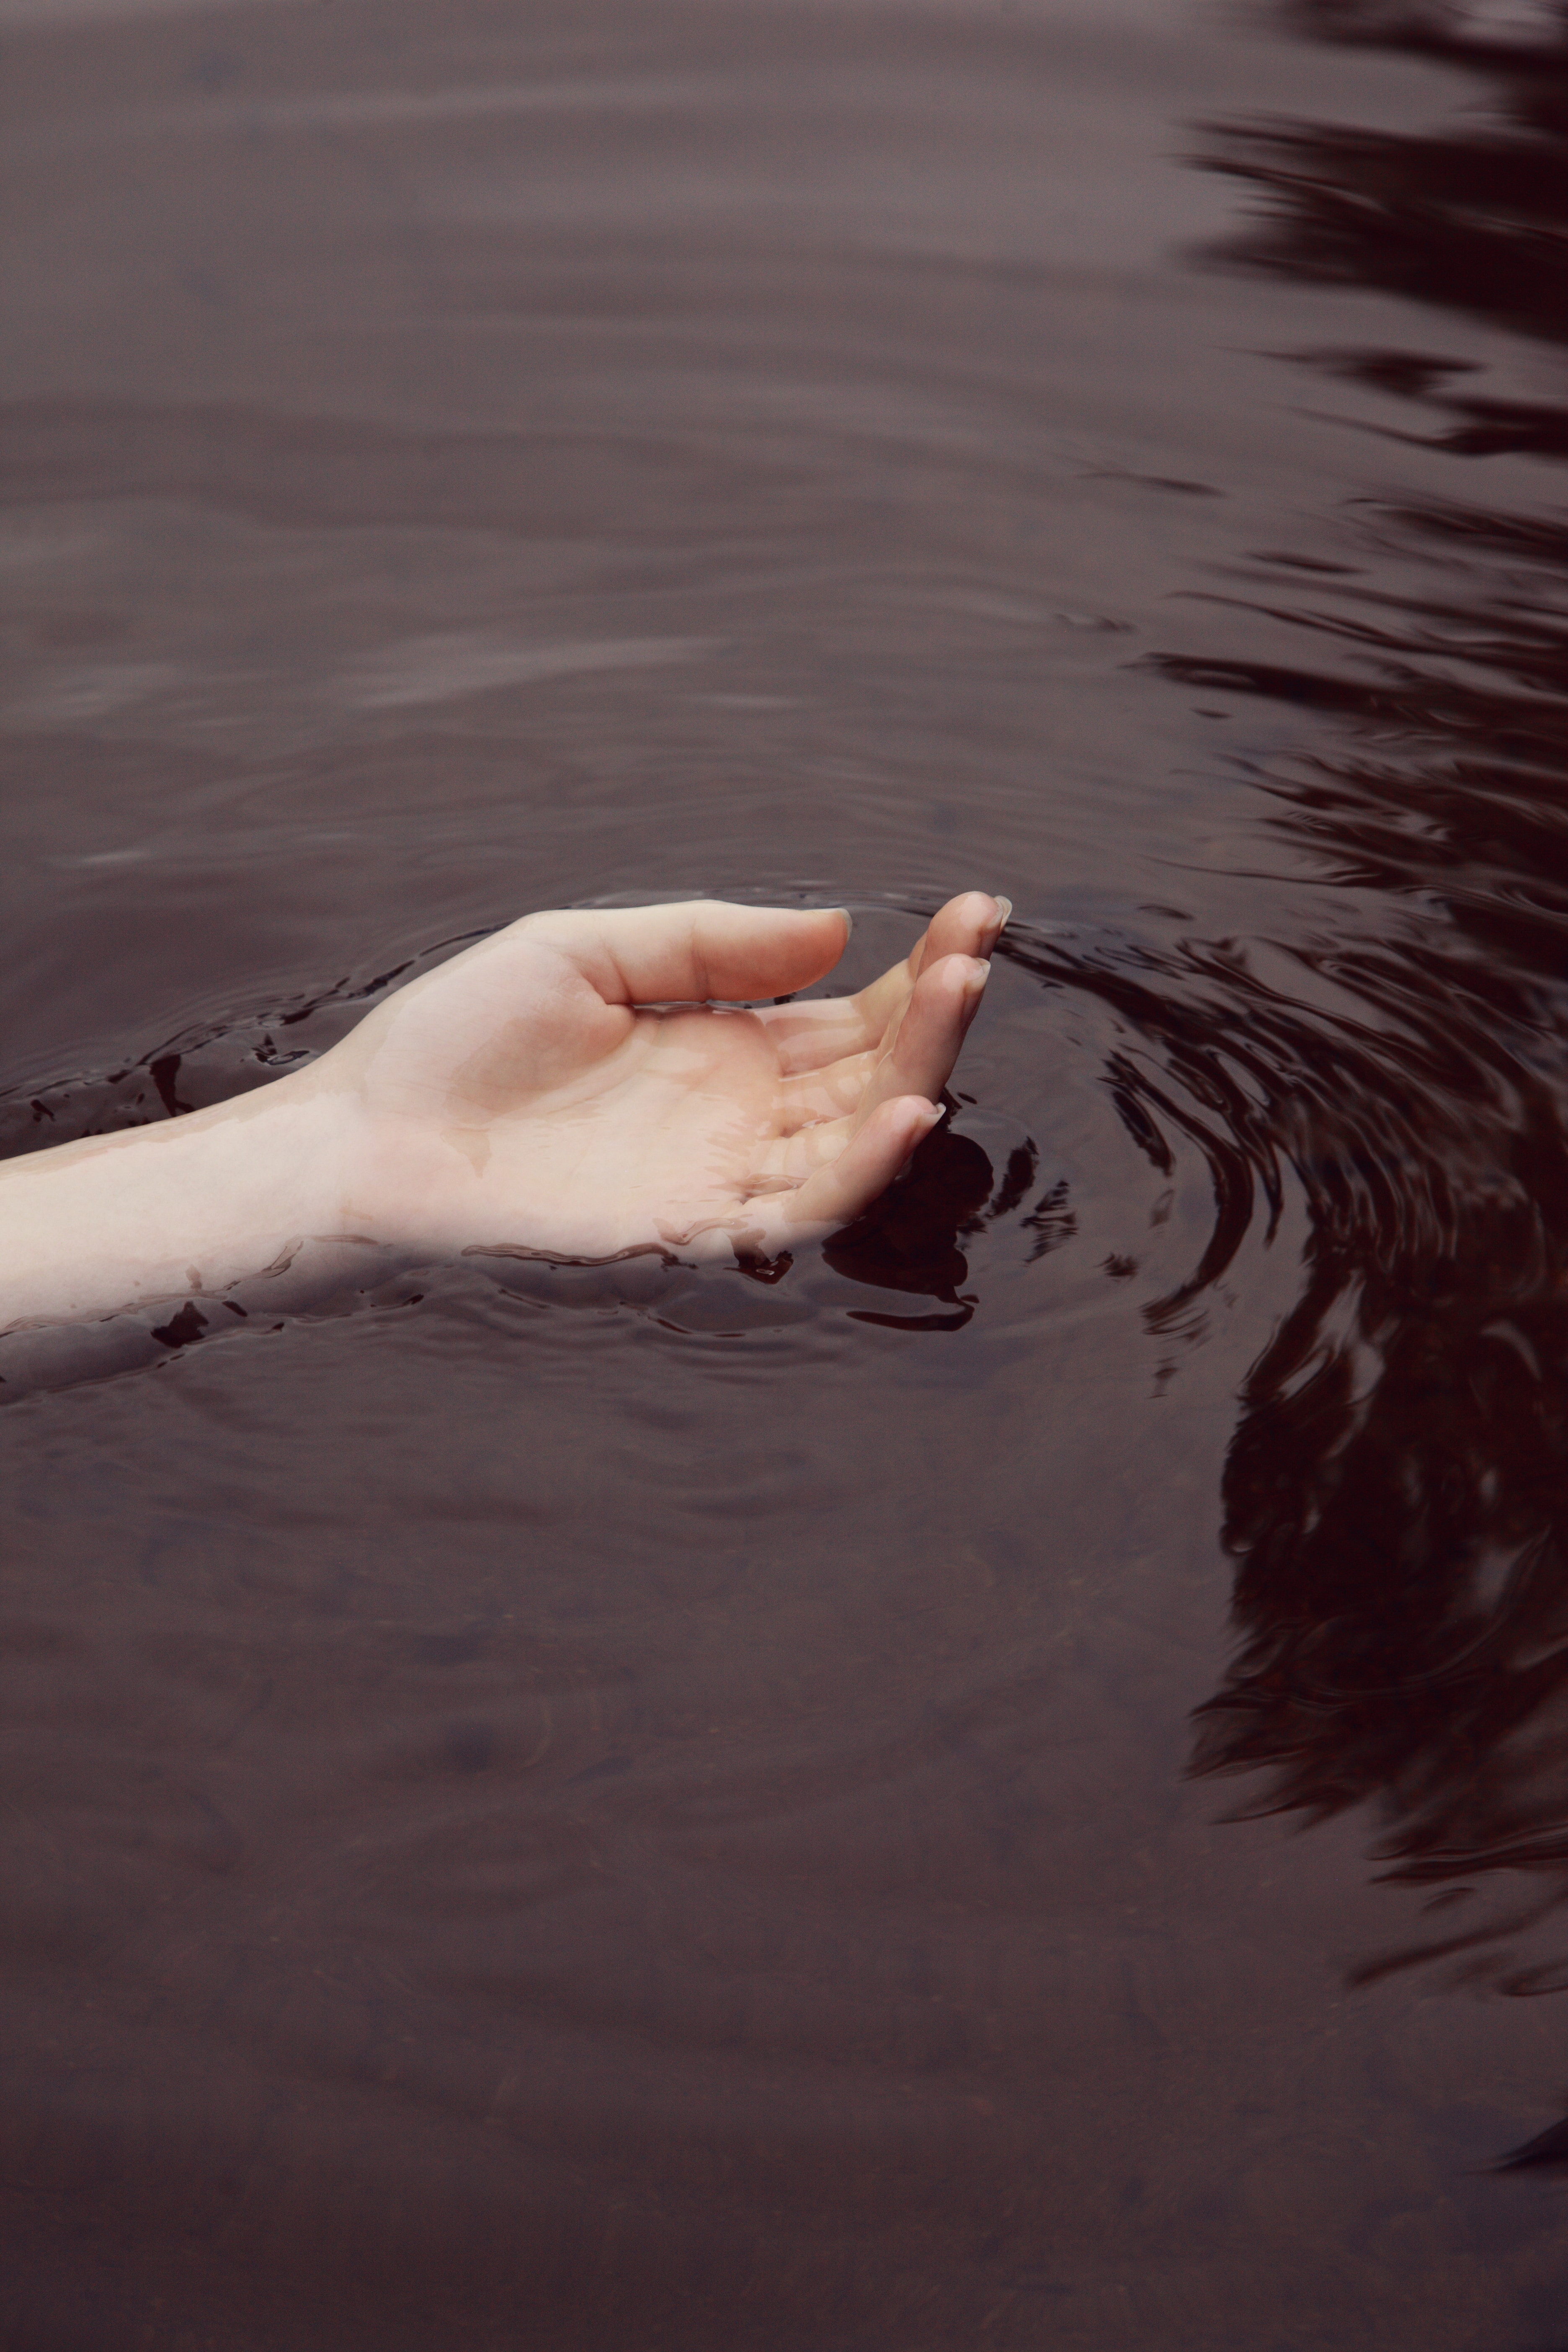 A hand floating in water. | Source: Unsplash